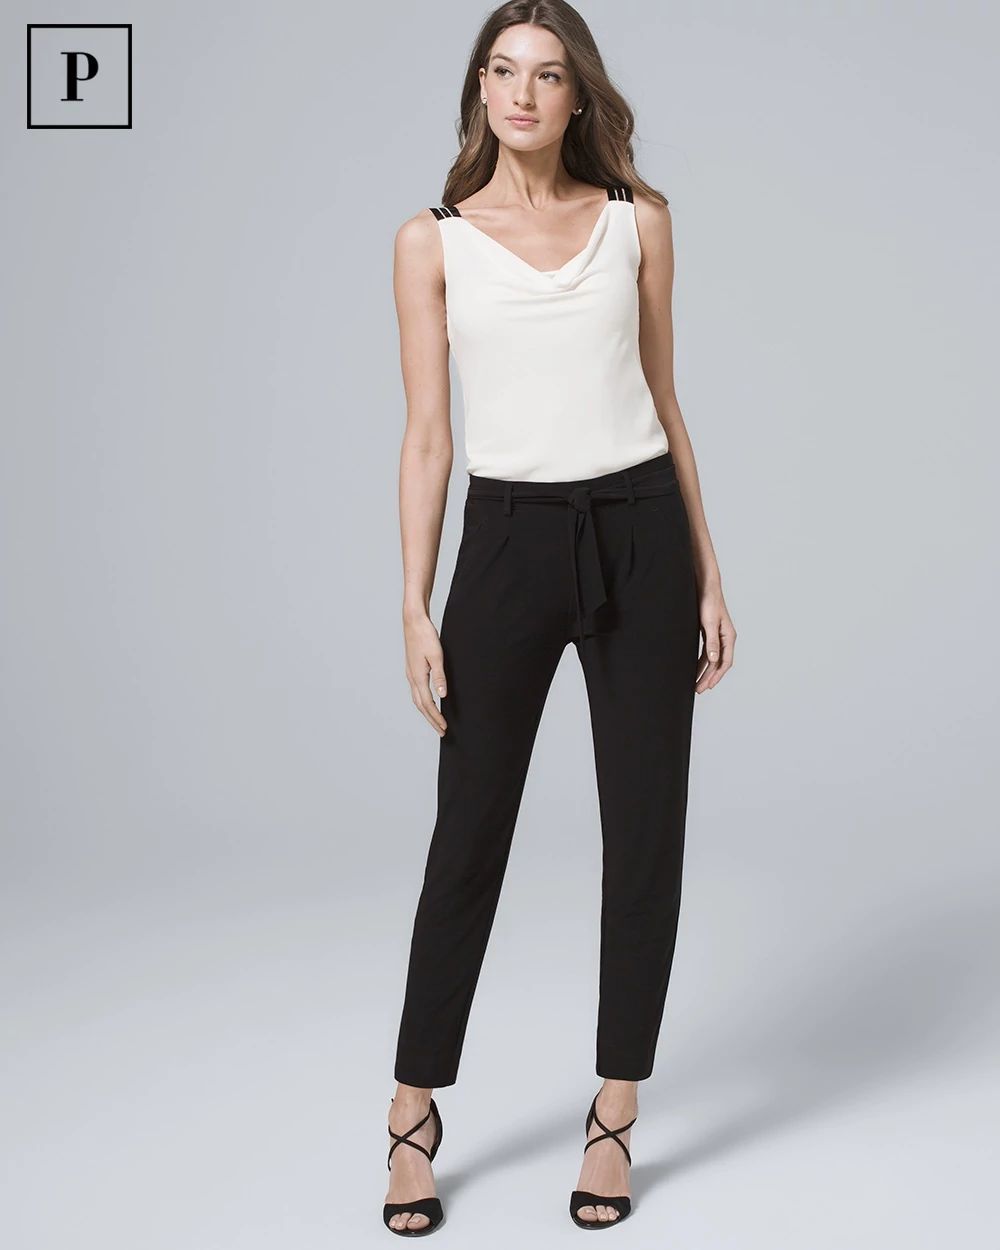 Soft Knit Tapered Pants click to view larger image.